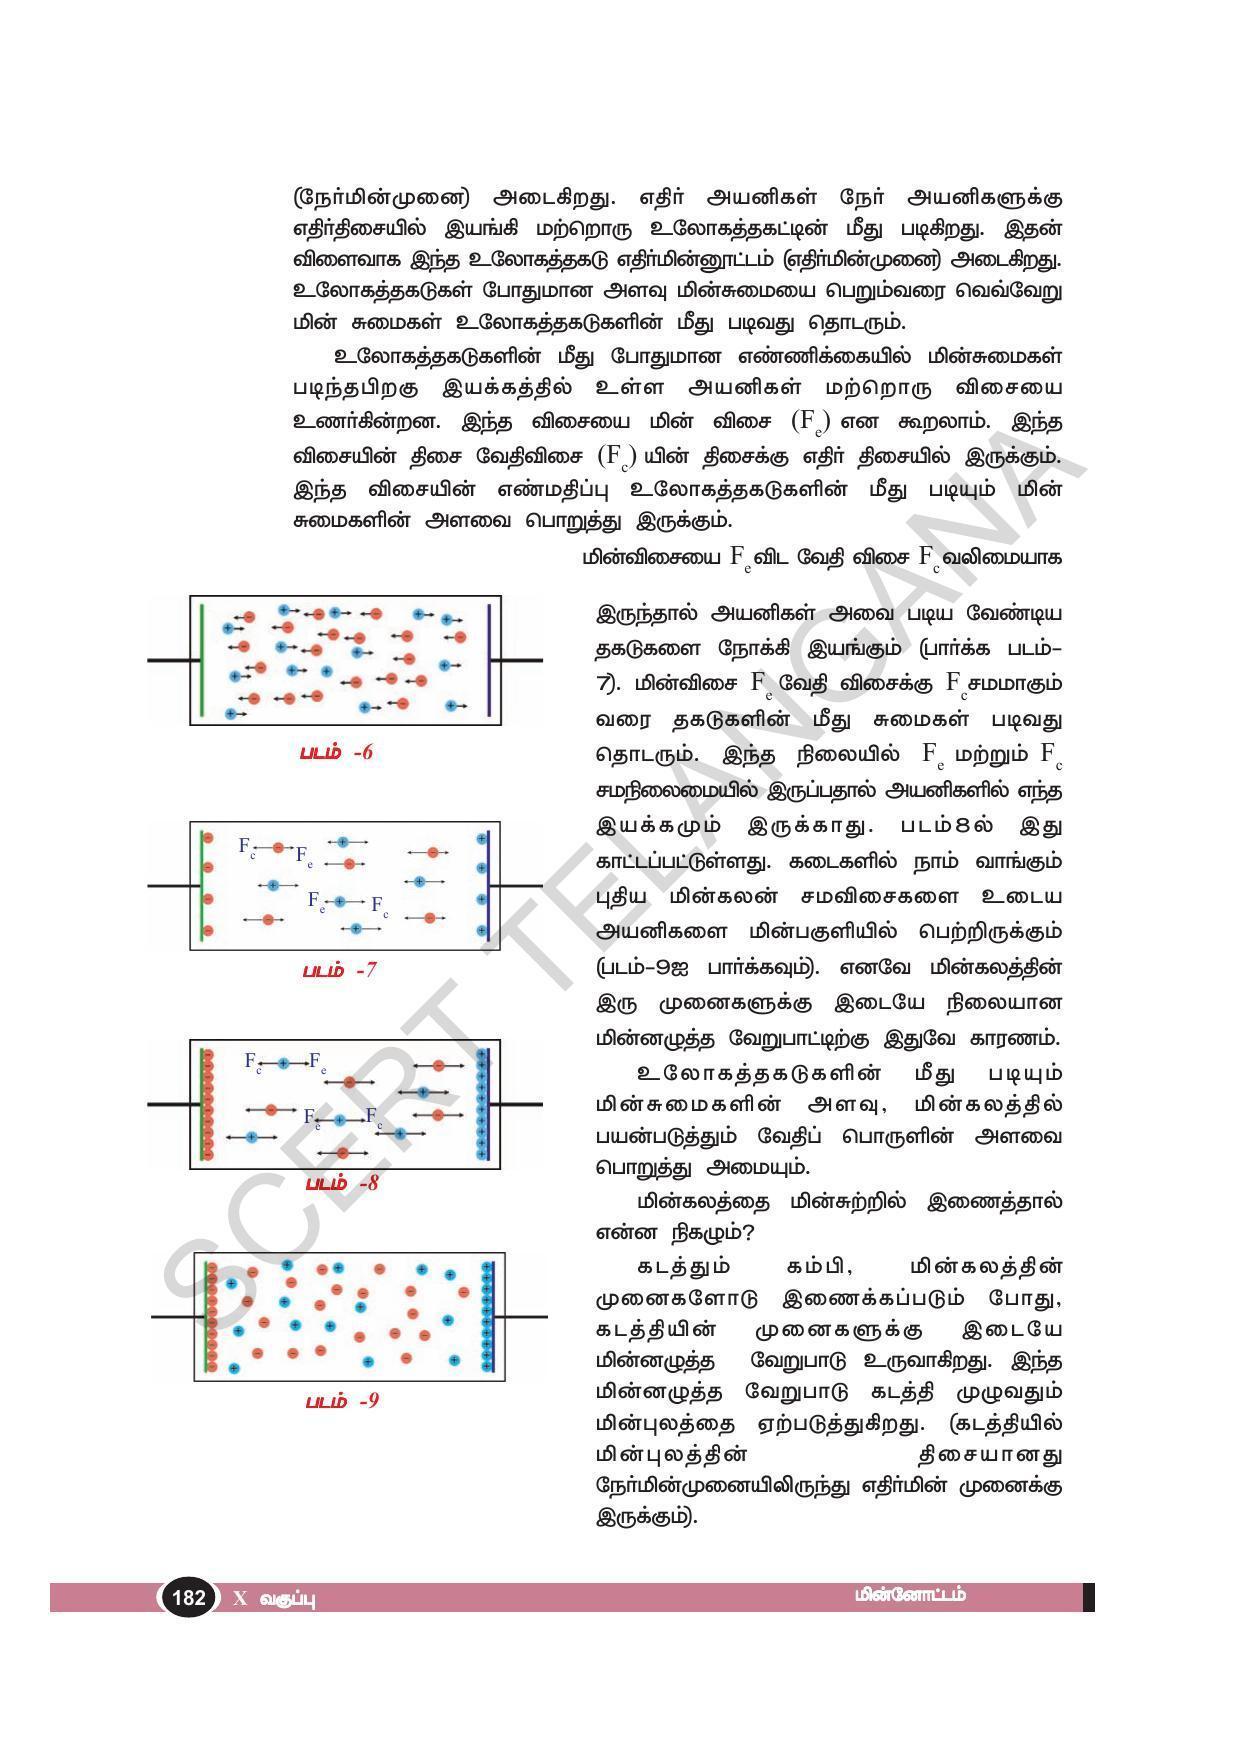 TS SCERT Class 10 Physical Science(Tamil Medium) Text Book - Page 194